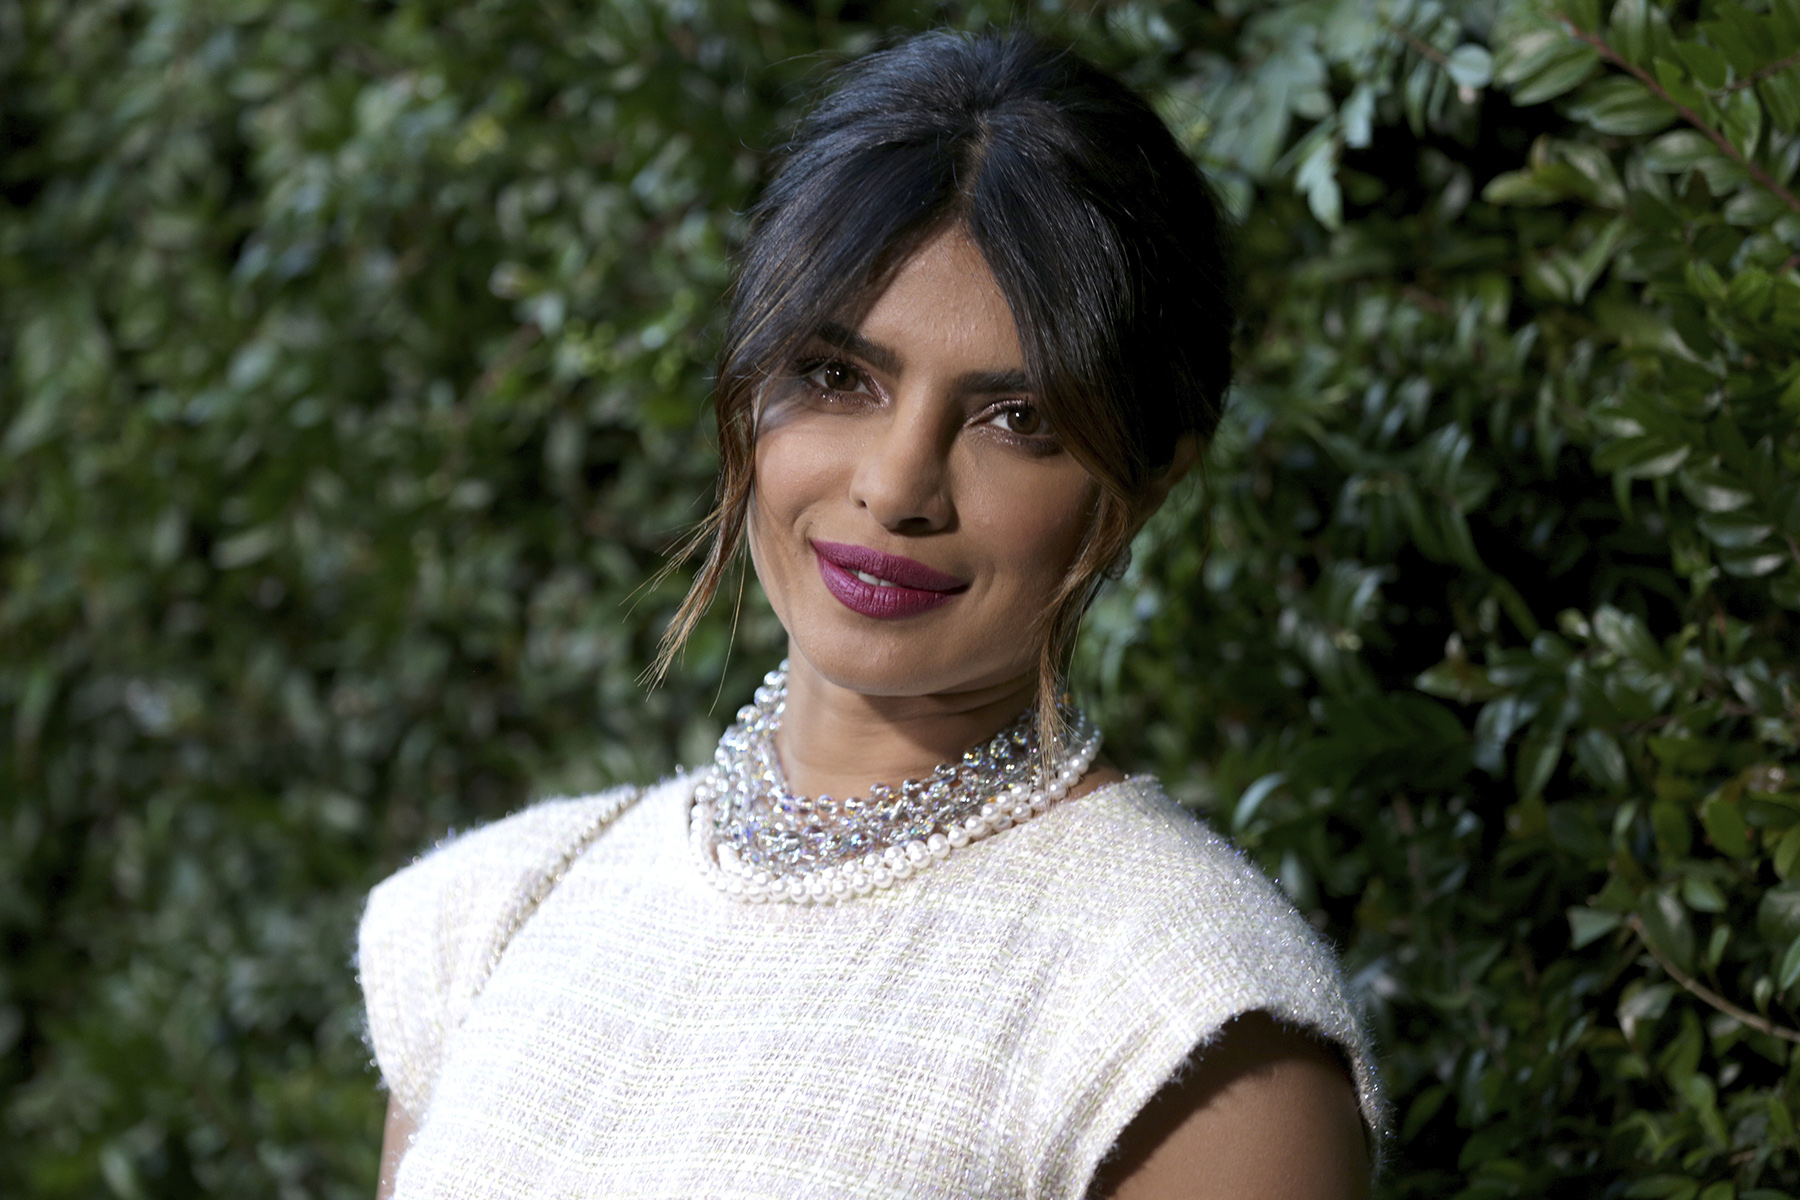 Photograph of Priyanka Chopra wearing a white dress, with her hair up, looking at the camera. Image: Rich Fury/Getty Images